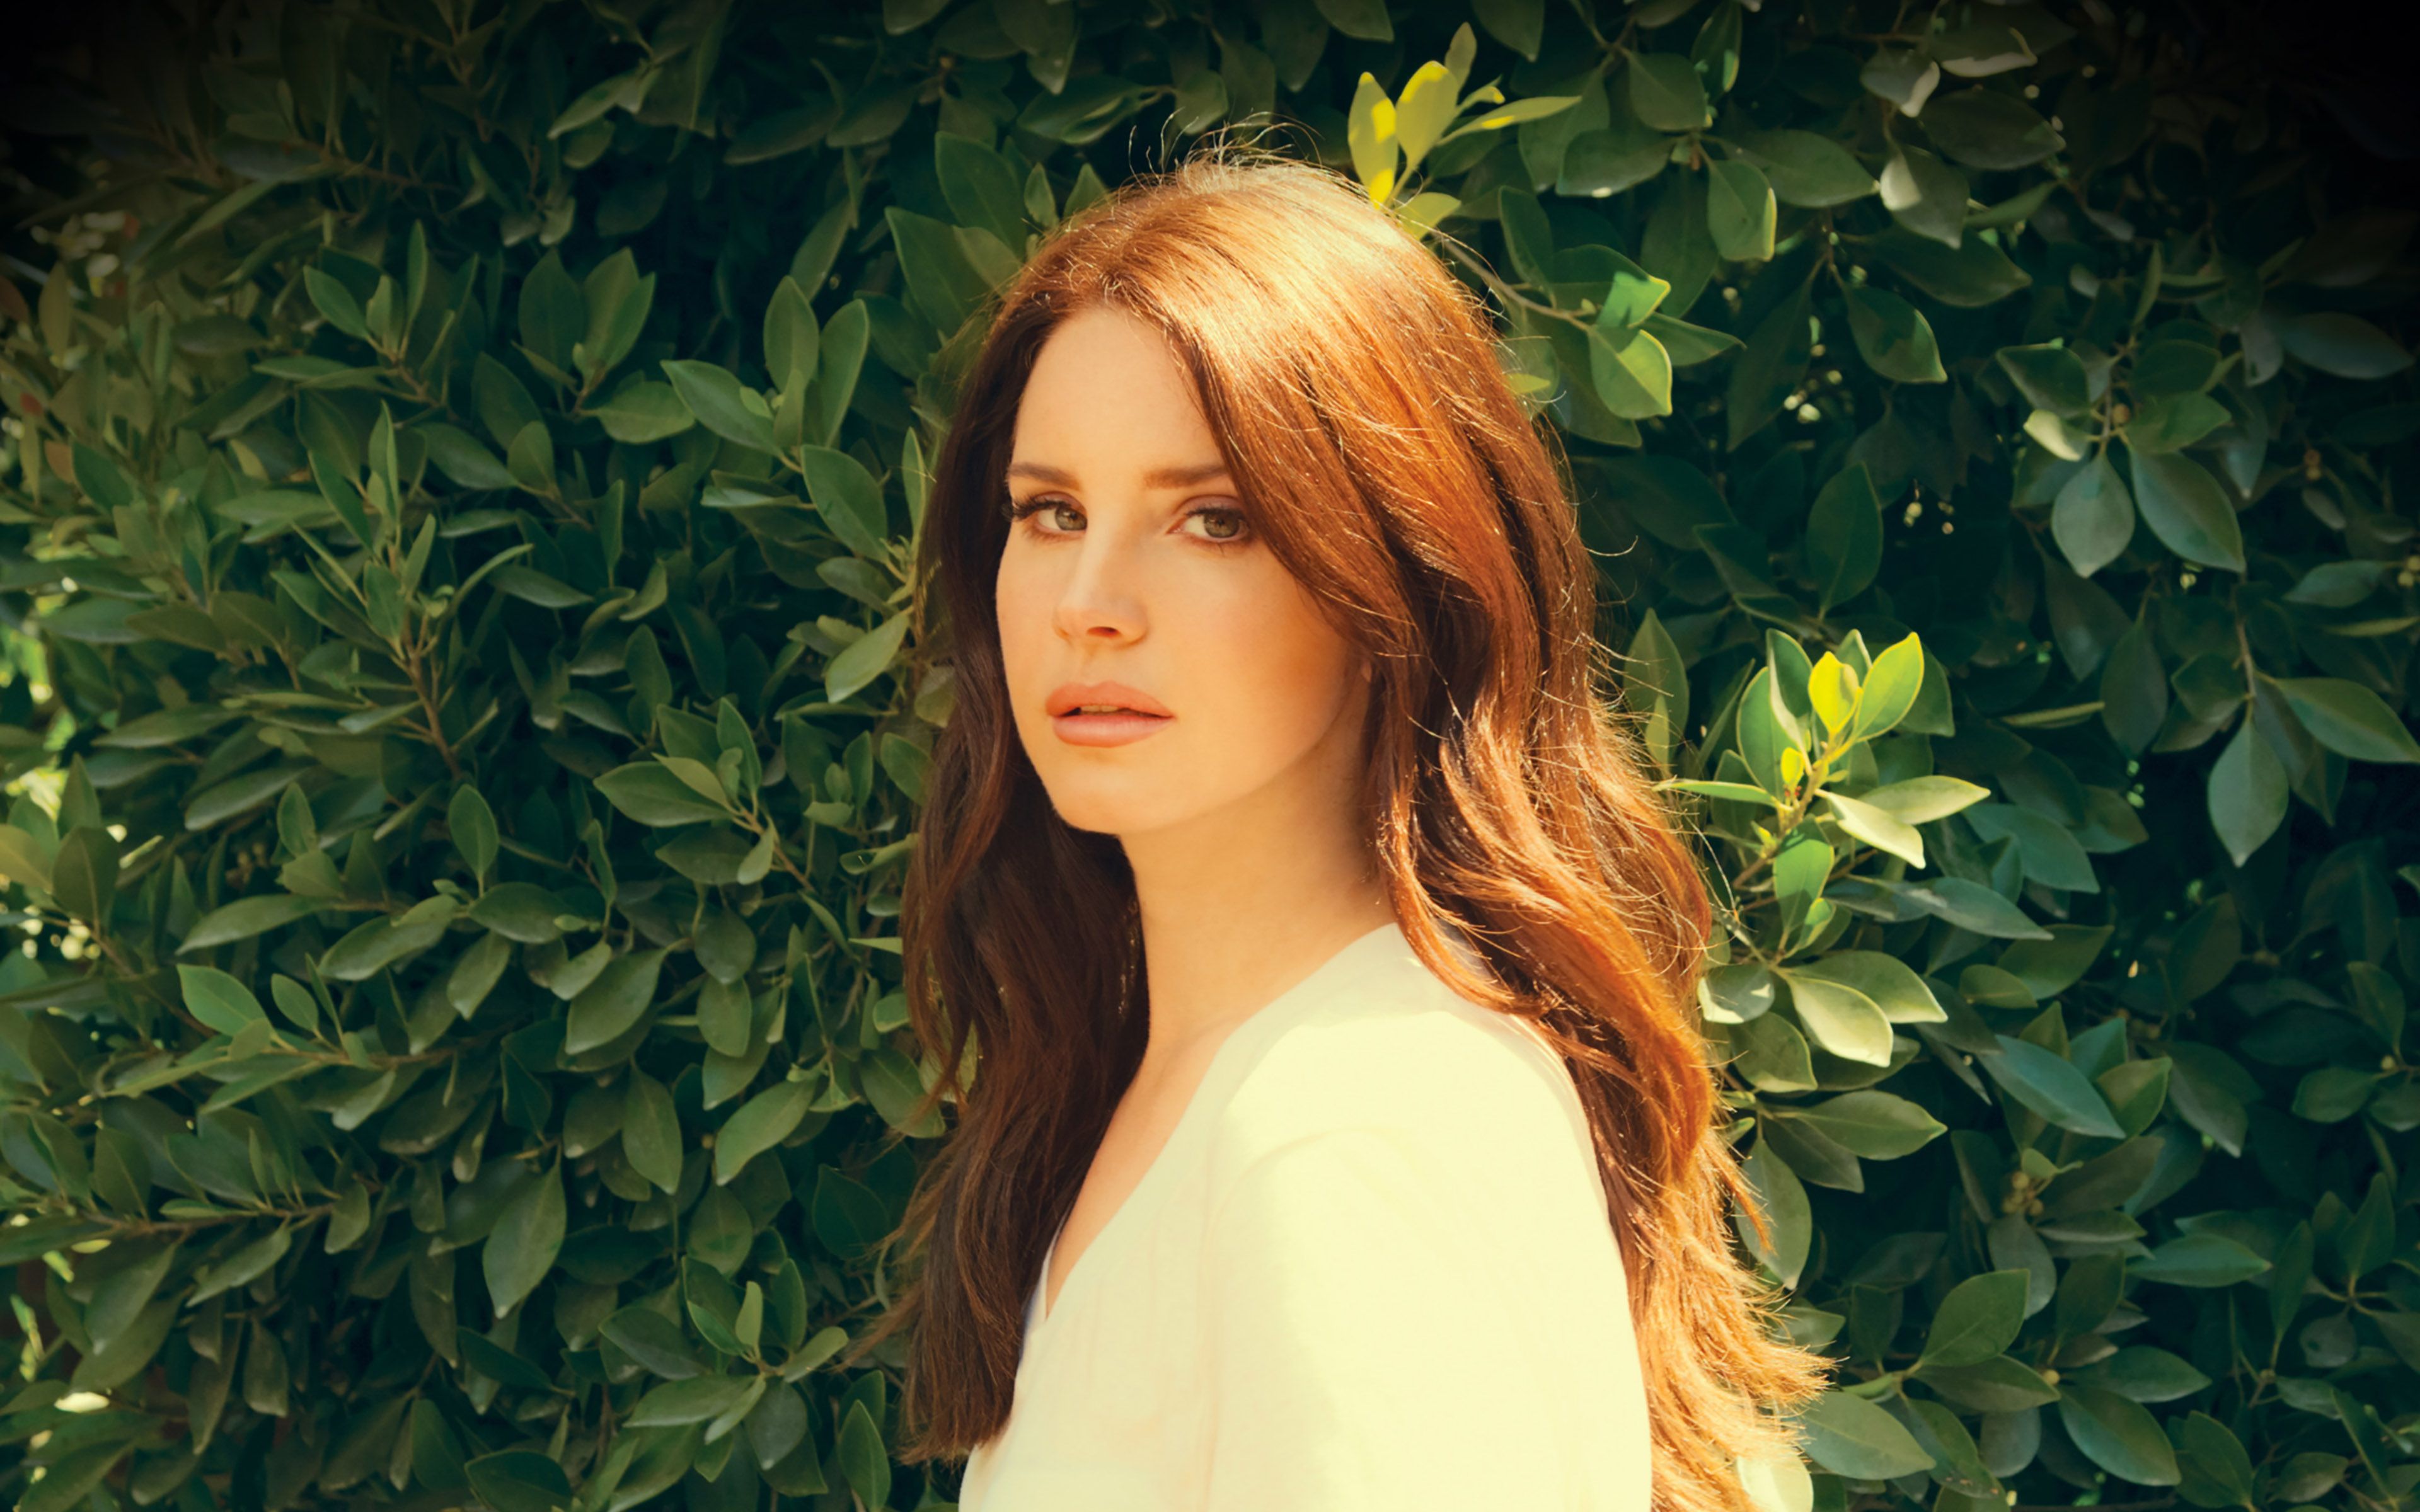 A woman with long red hair stands in front of a green bush. - Lana Del Rey